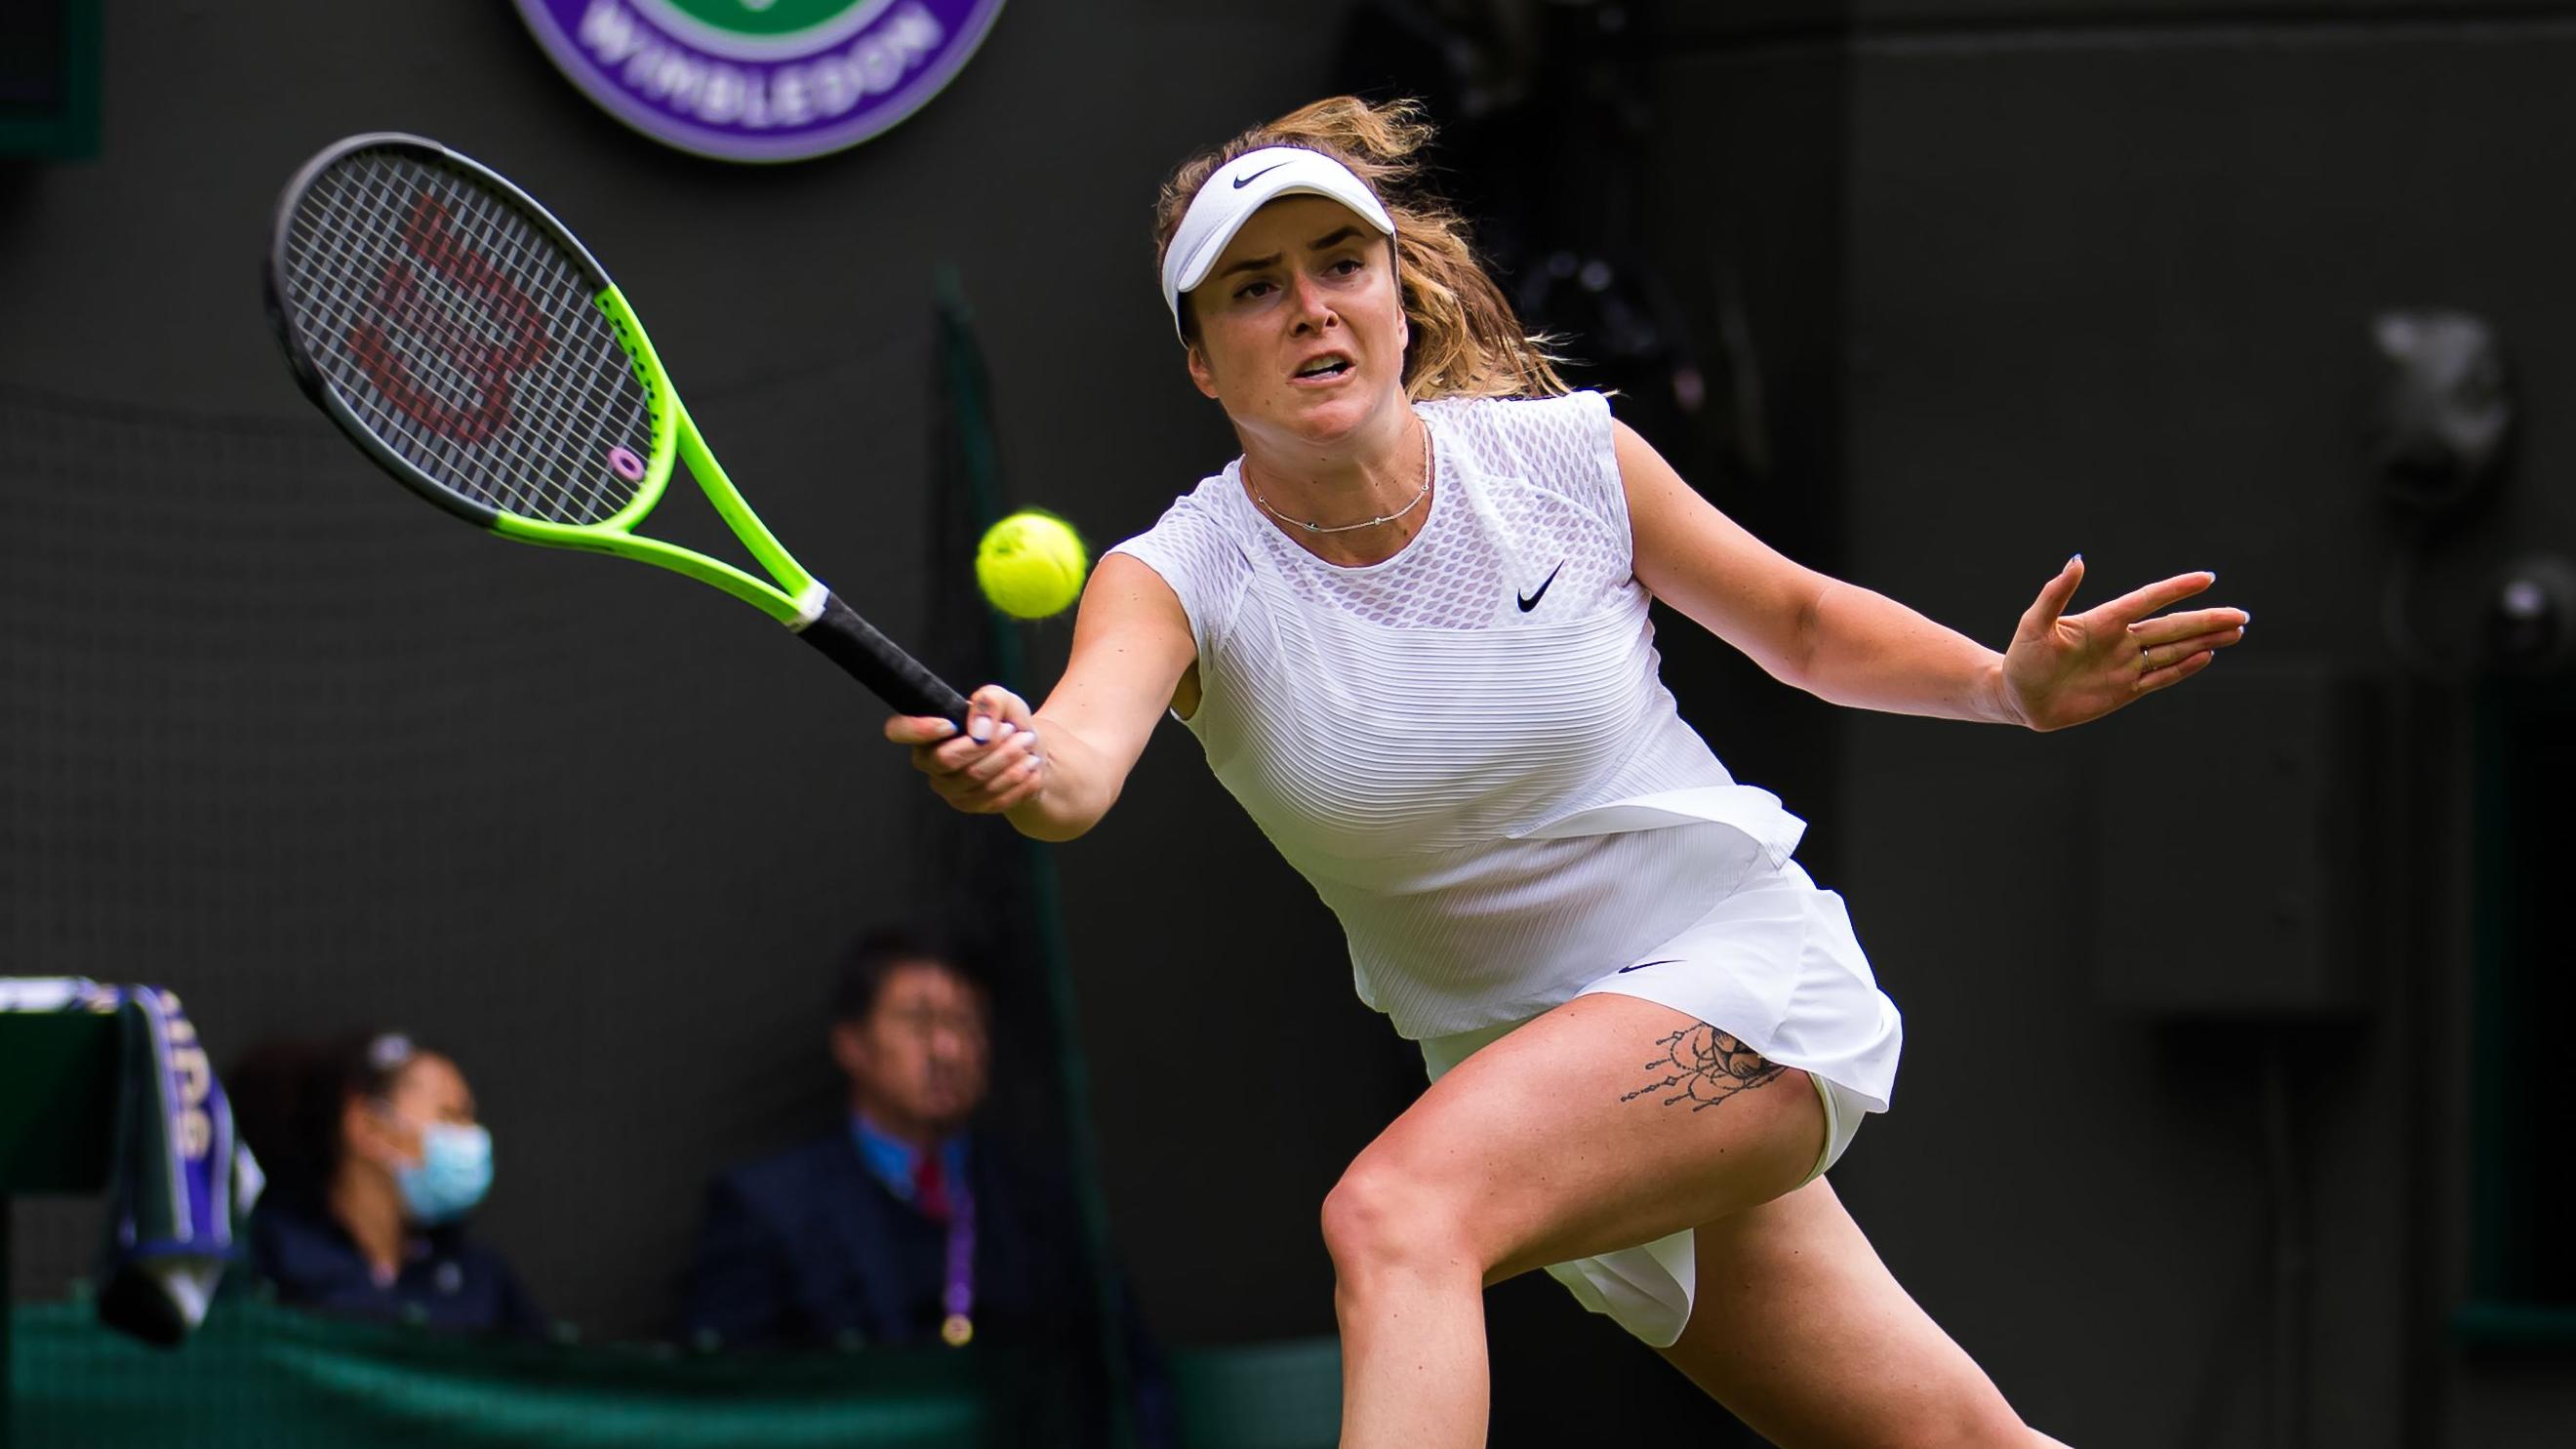 Svitolina Defeated Her Second Tennis Rival at Tokyo Olympics